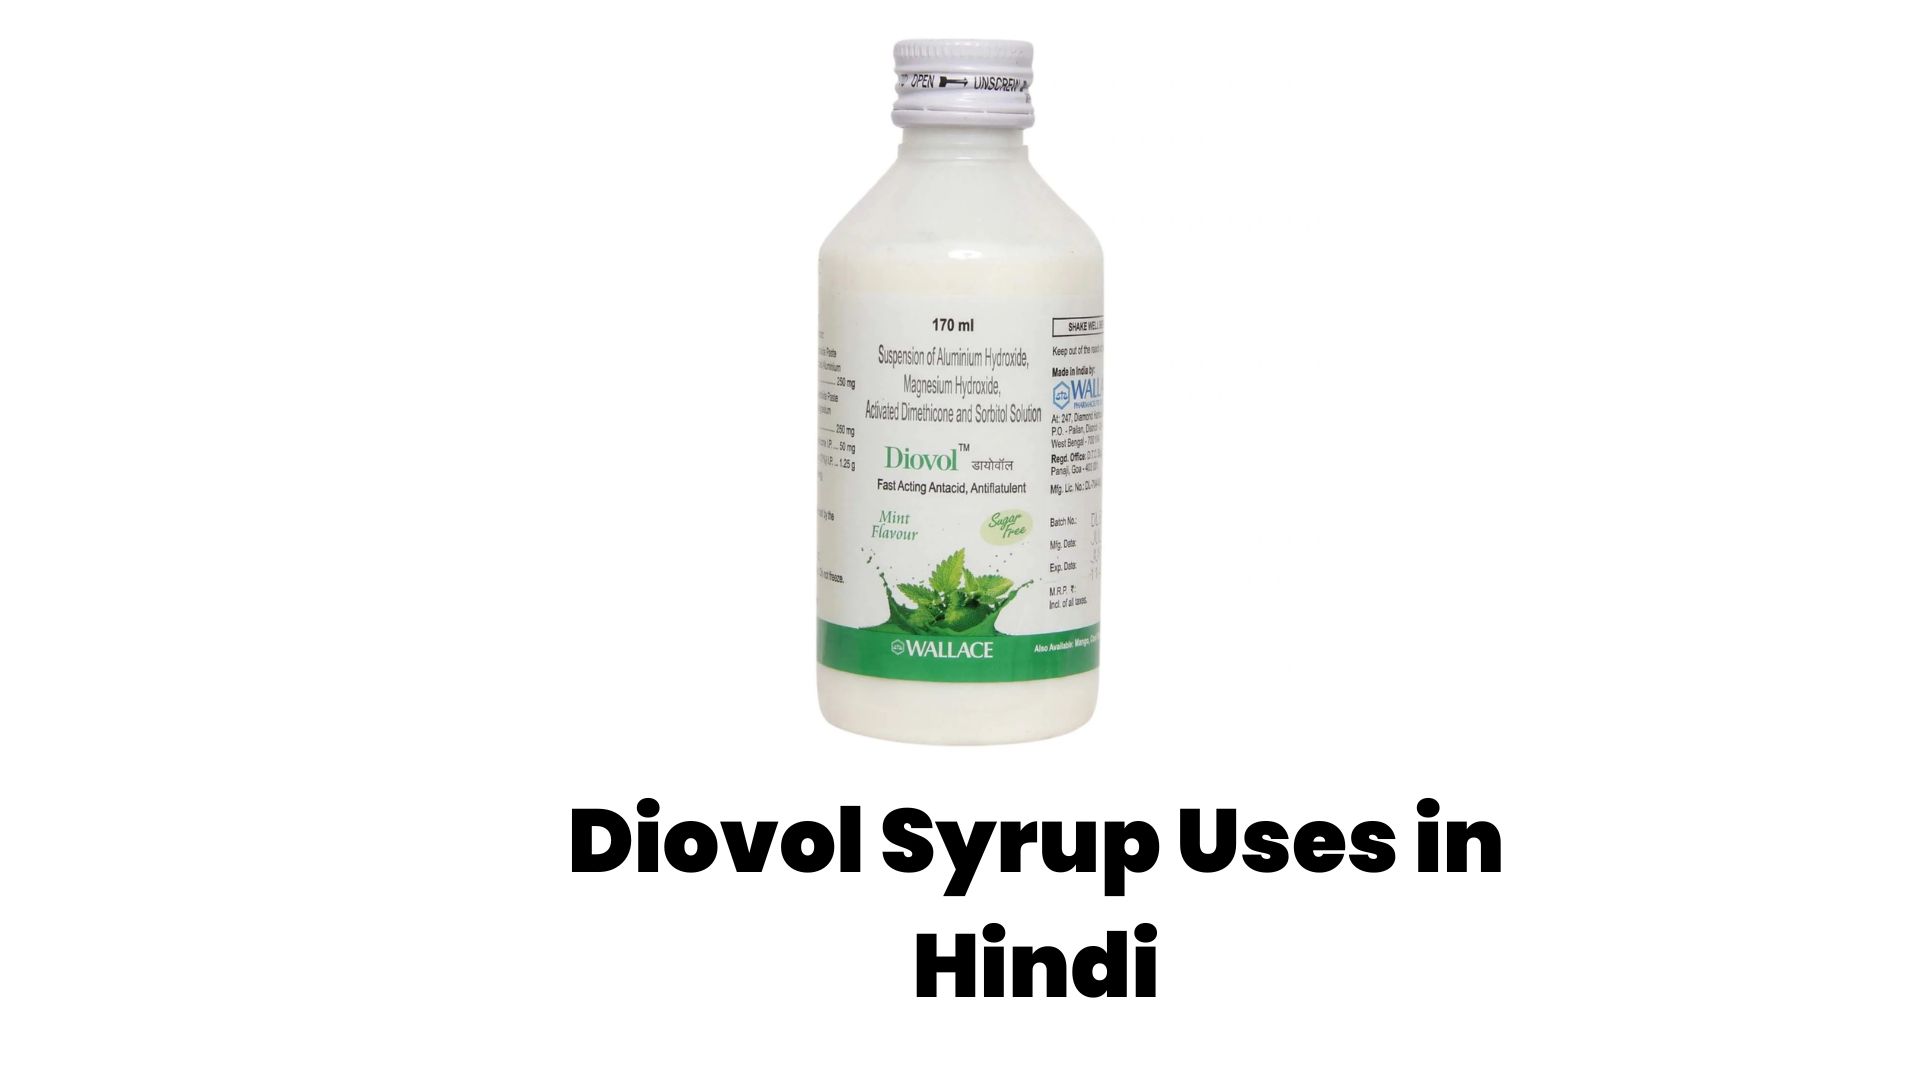 Diovol Syrup Uses in Hindi